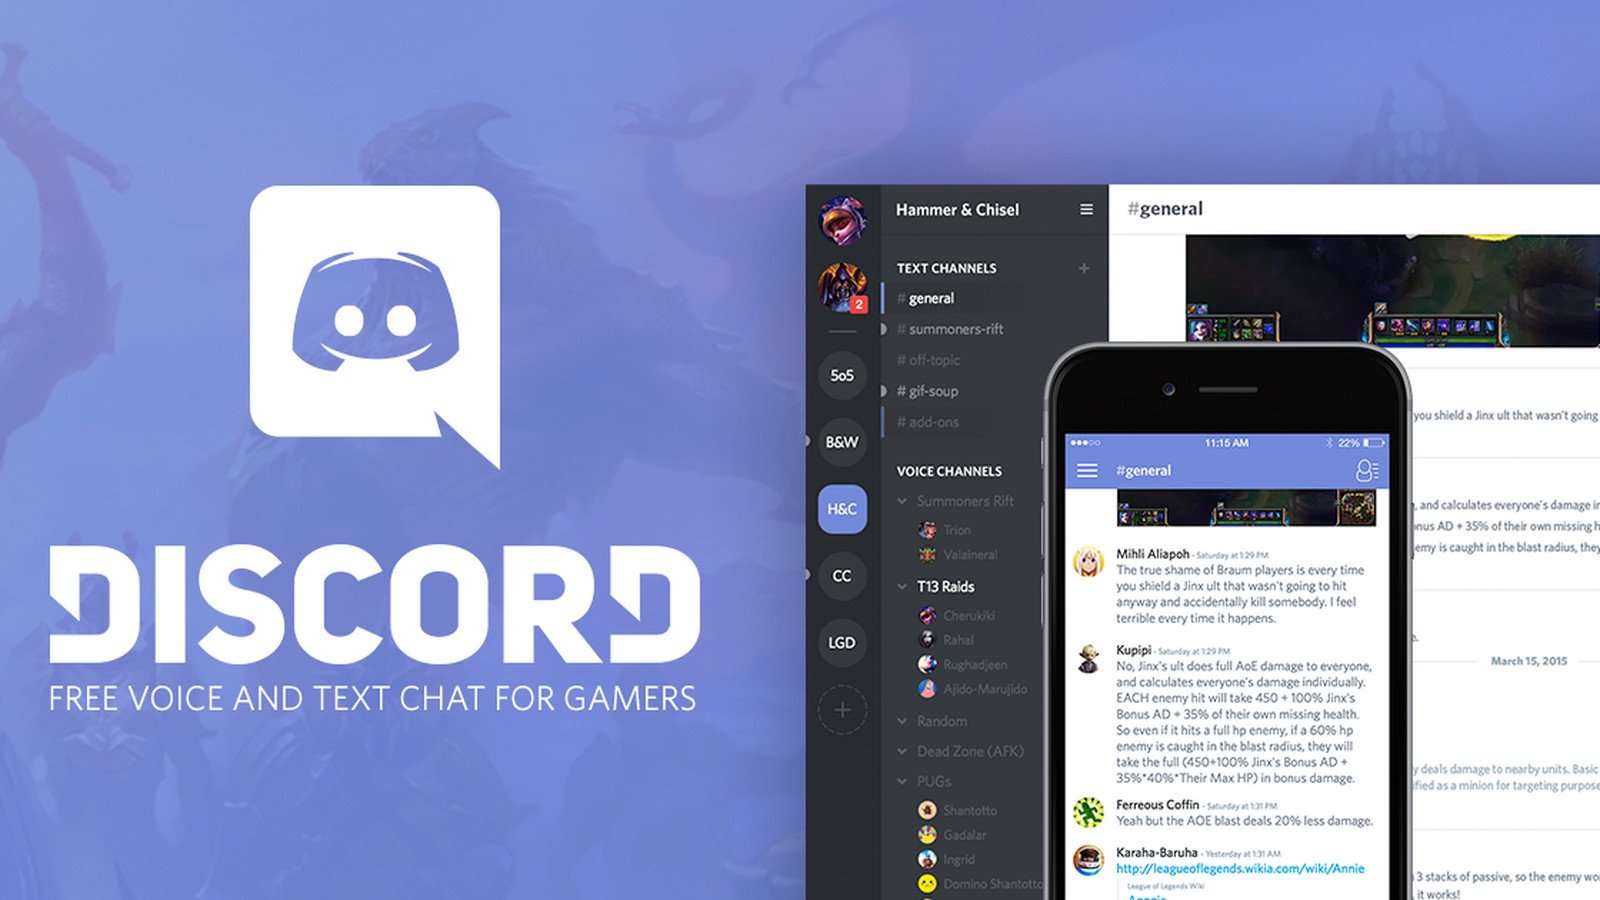 image for Discord bans servers that promote Nazi ideology